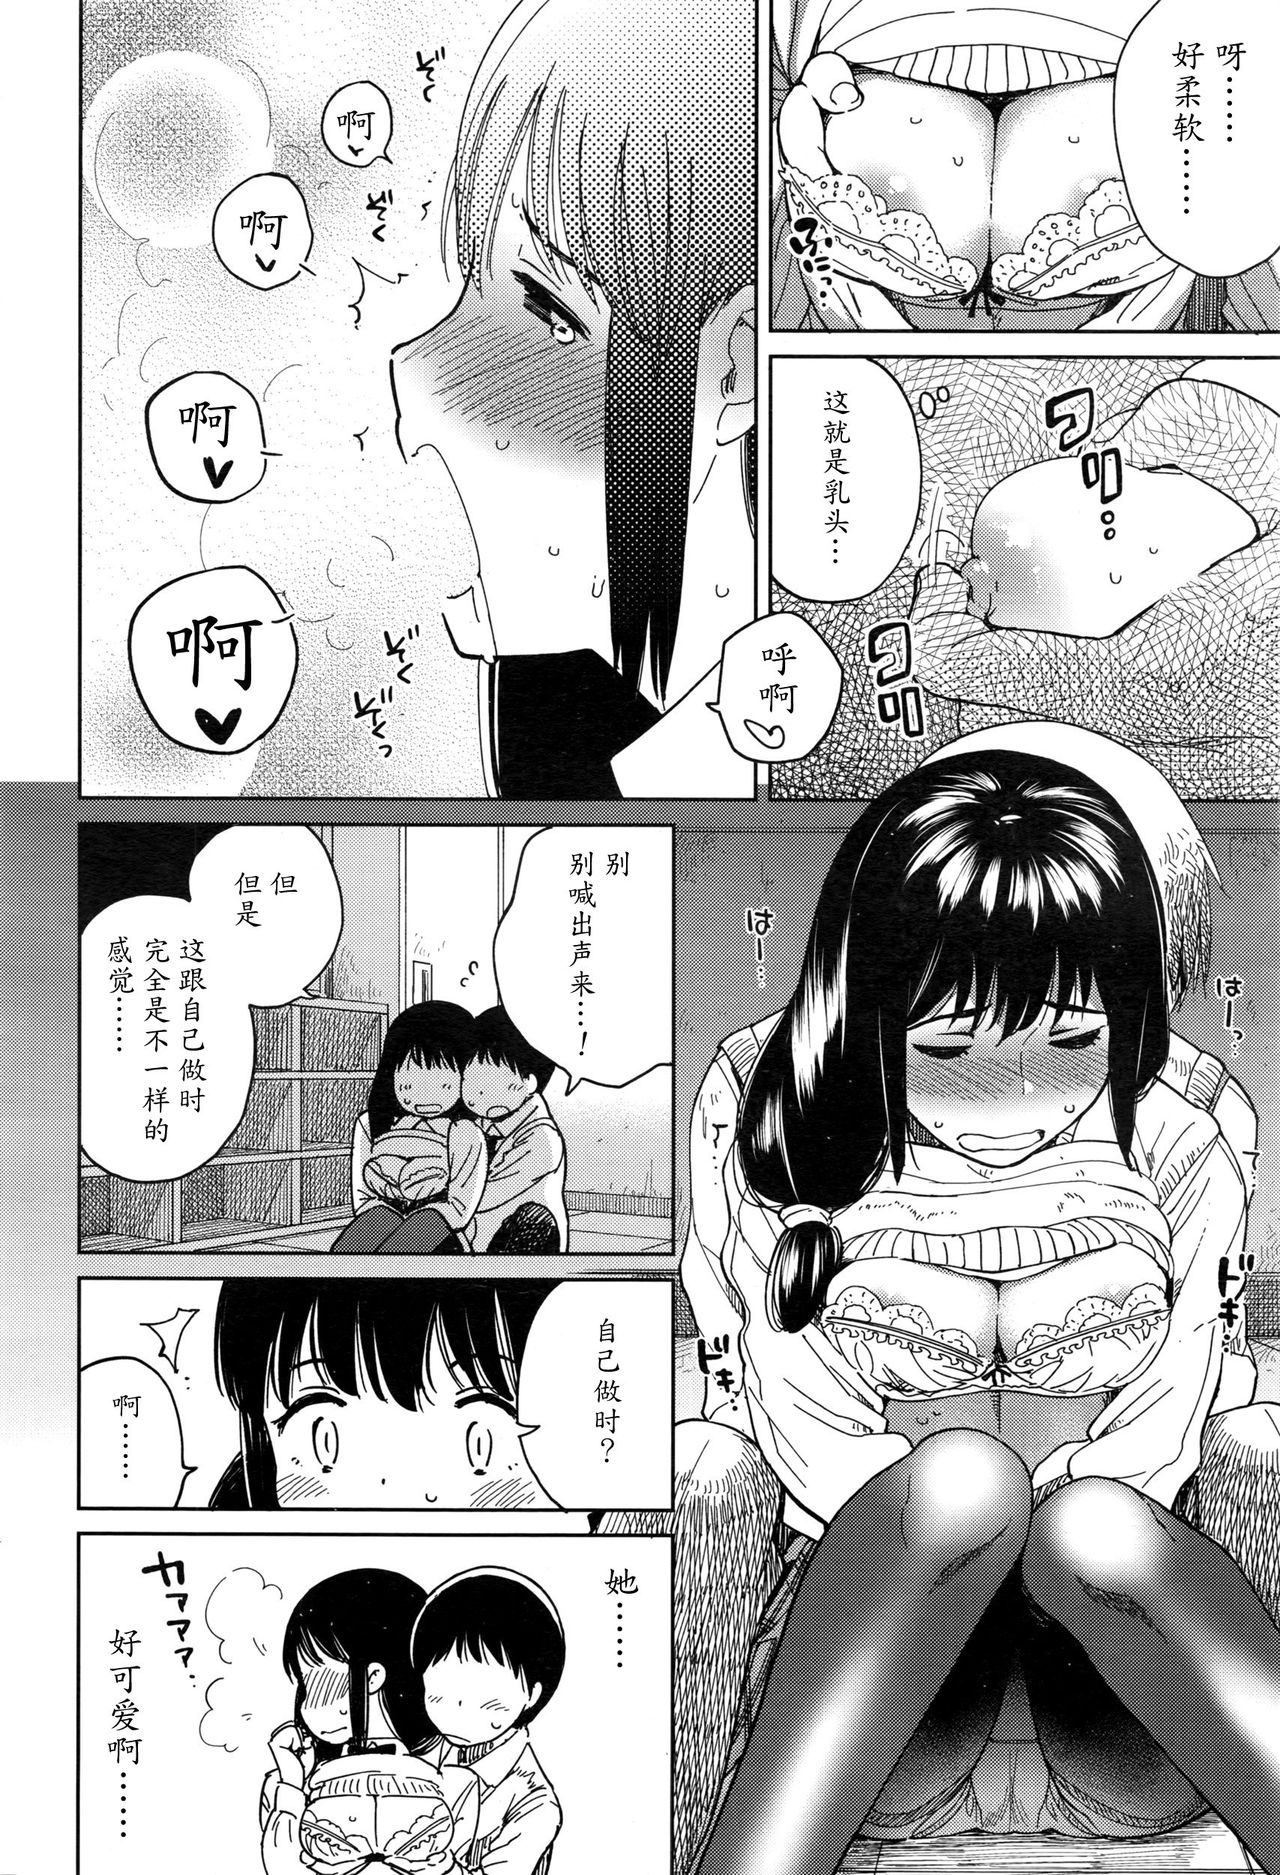 [Shiden] Houkago Rendezvous | Afterschool Rendezvous (COMIC Koh 2017-01) [Chinese] [魔劍个人汉化] [しでん] 放課後ランデブー (COMIC 高 2017年1月号) [中文翻譯]